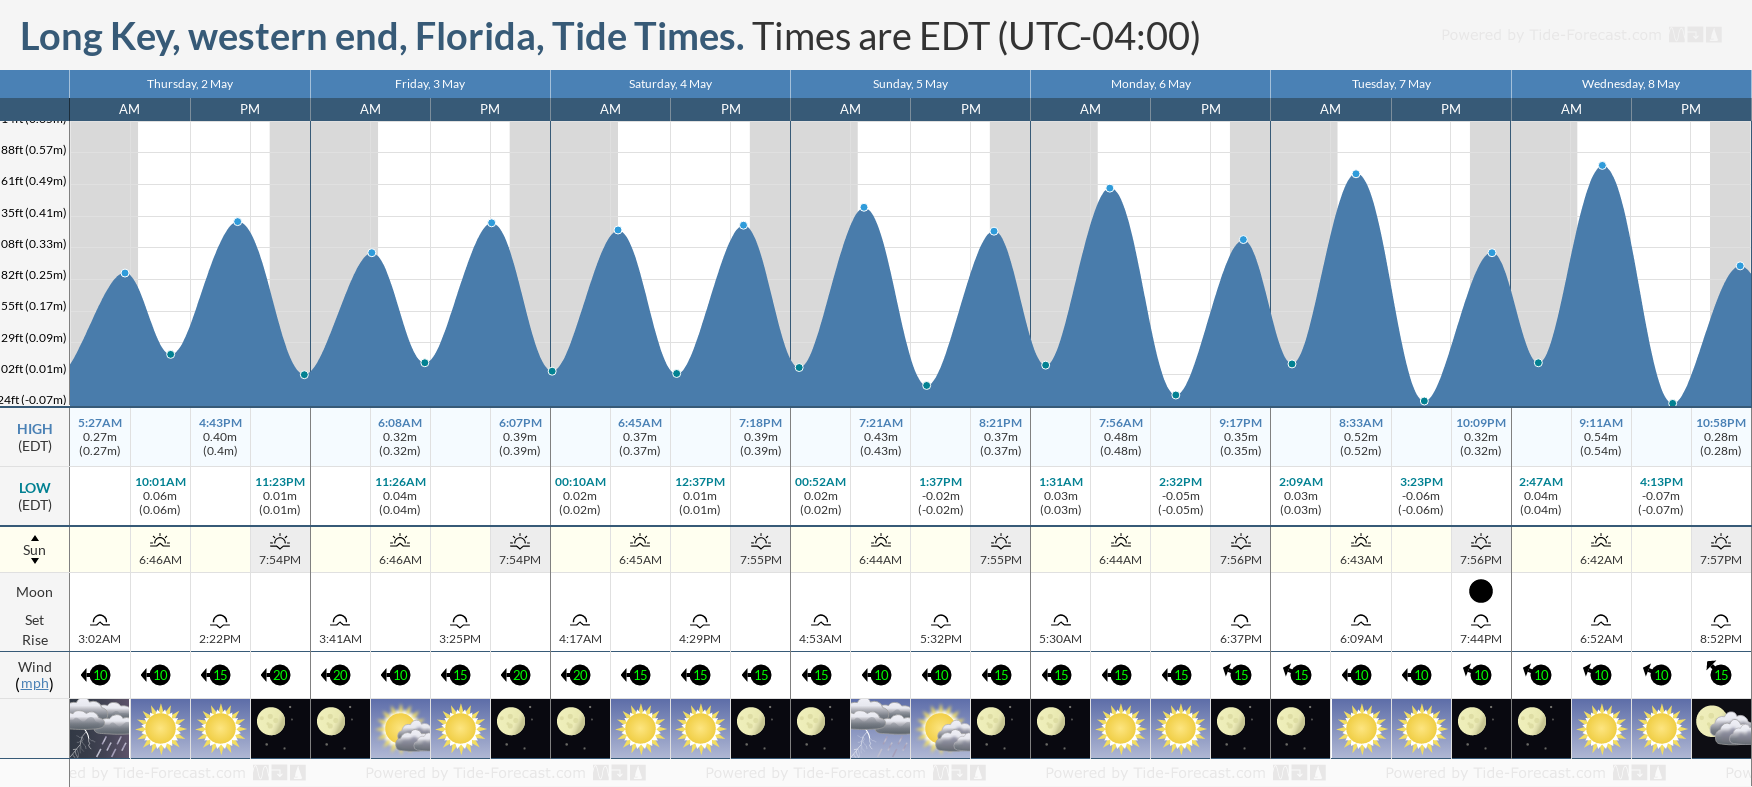 Long Key, western end, Florida Tide Chart including high and low tide tide times for the next 7 days